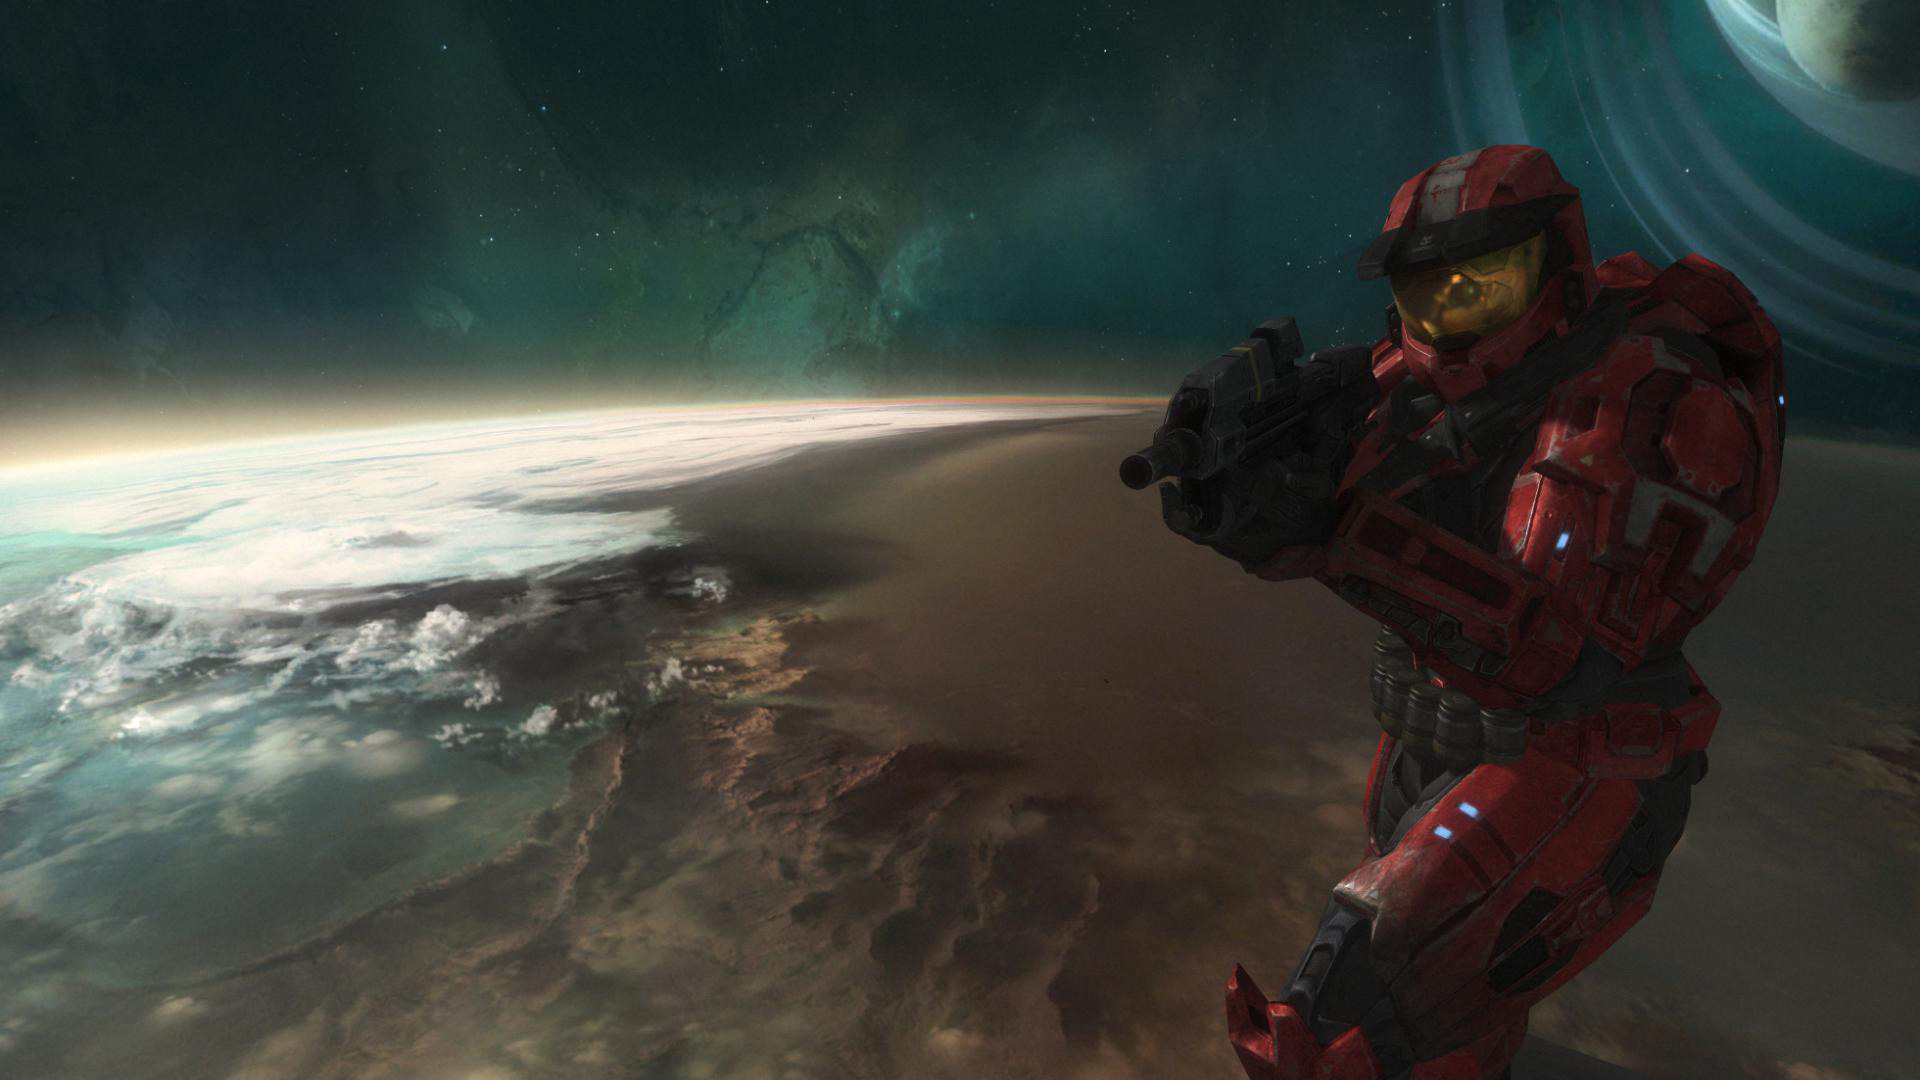 Halo Reach Long Night of Solace